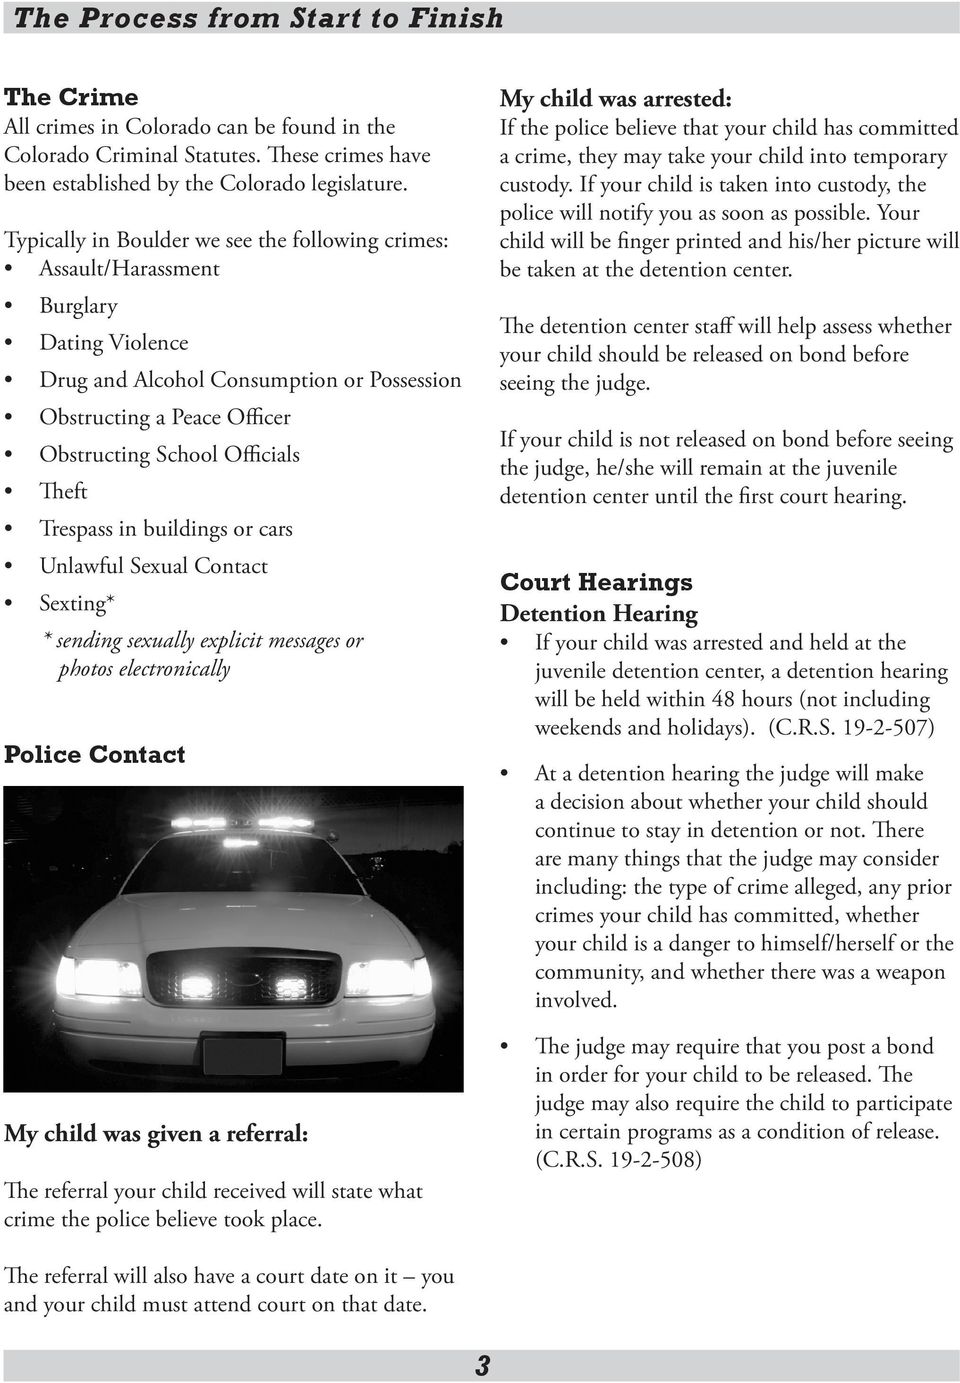 Trespass in buildings or cars Unlawful Sexual Contact Sexting* * sending sexually explicit messages or photos electronically Police Contact My child was given a referral: The referral your child